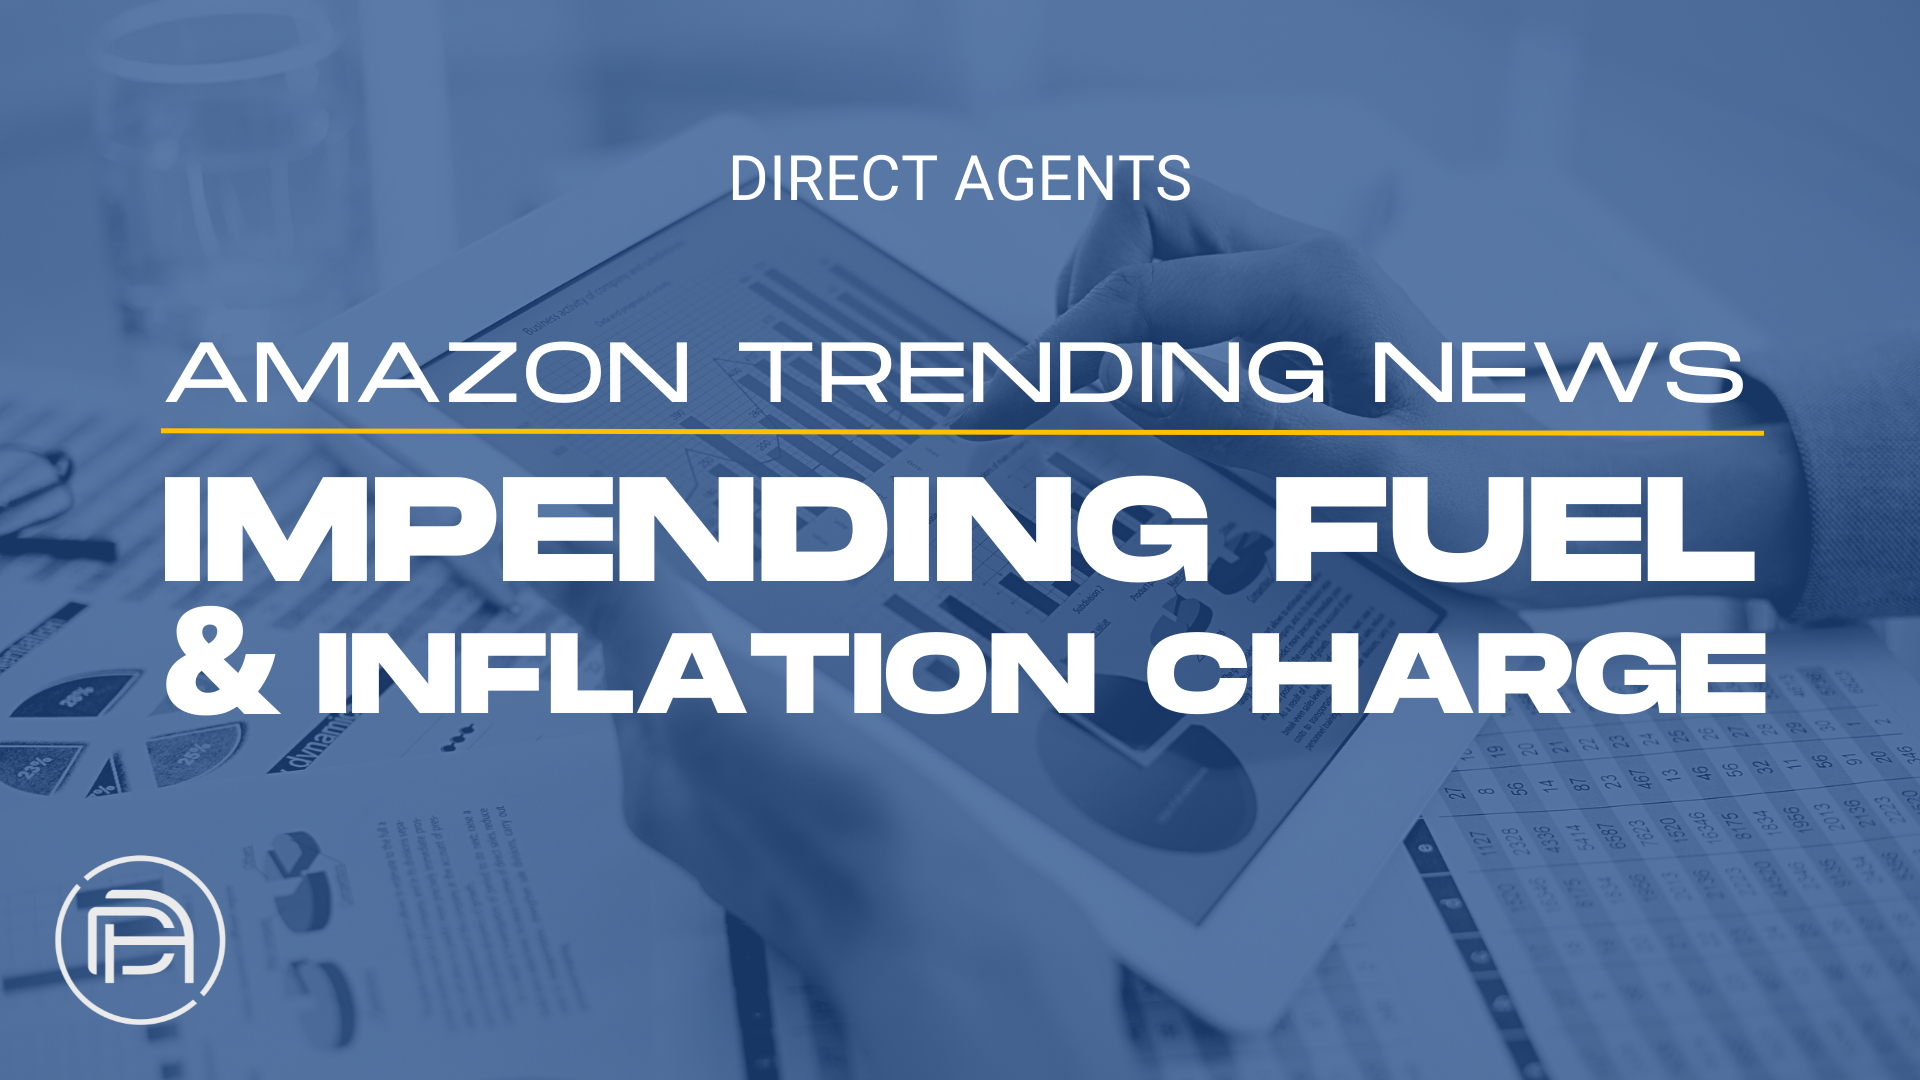 Amazon Trending News: Impending Fuel and Inflation Upcharge